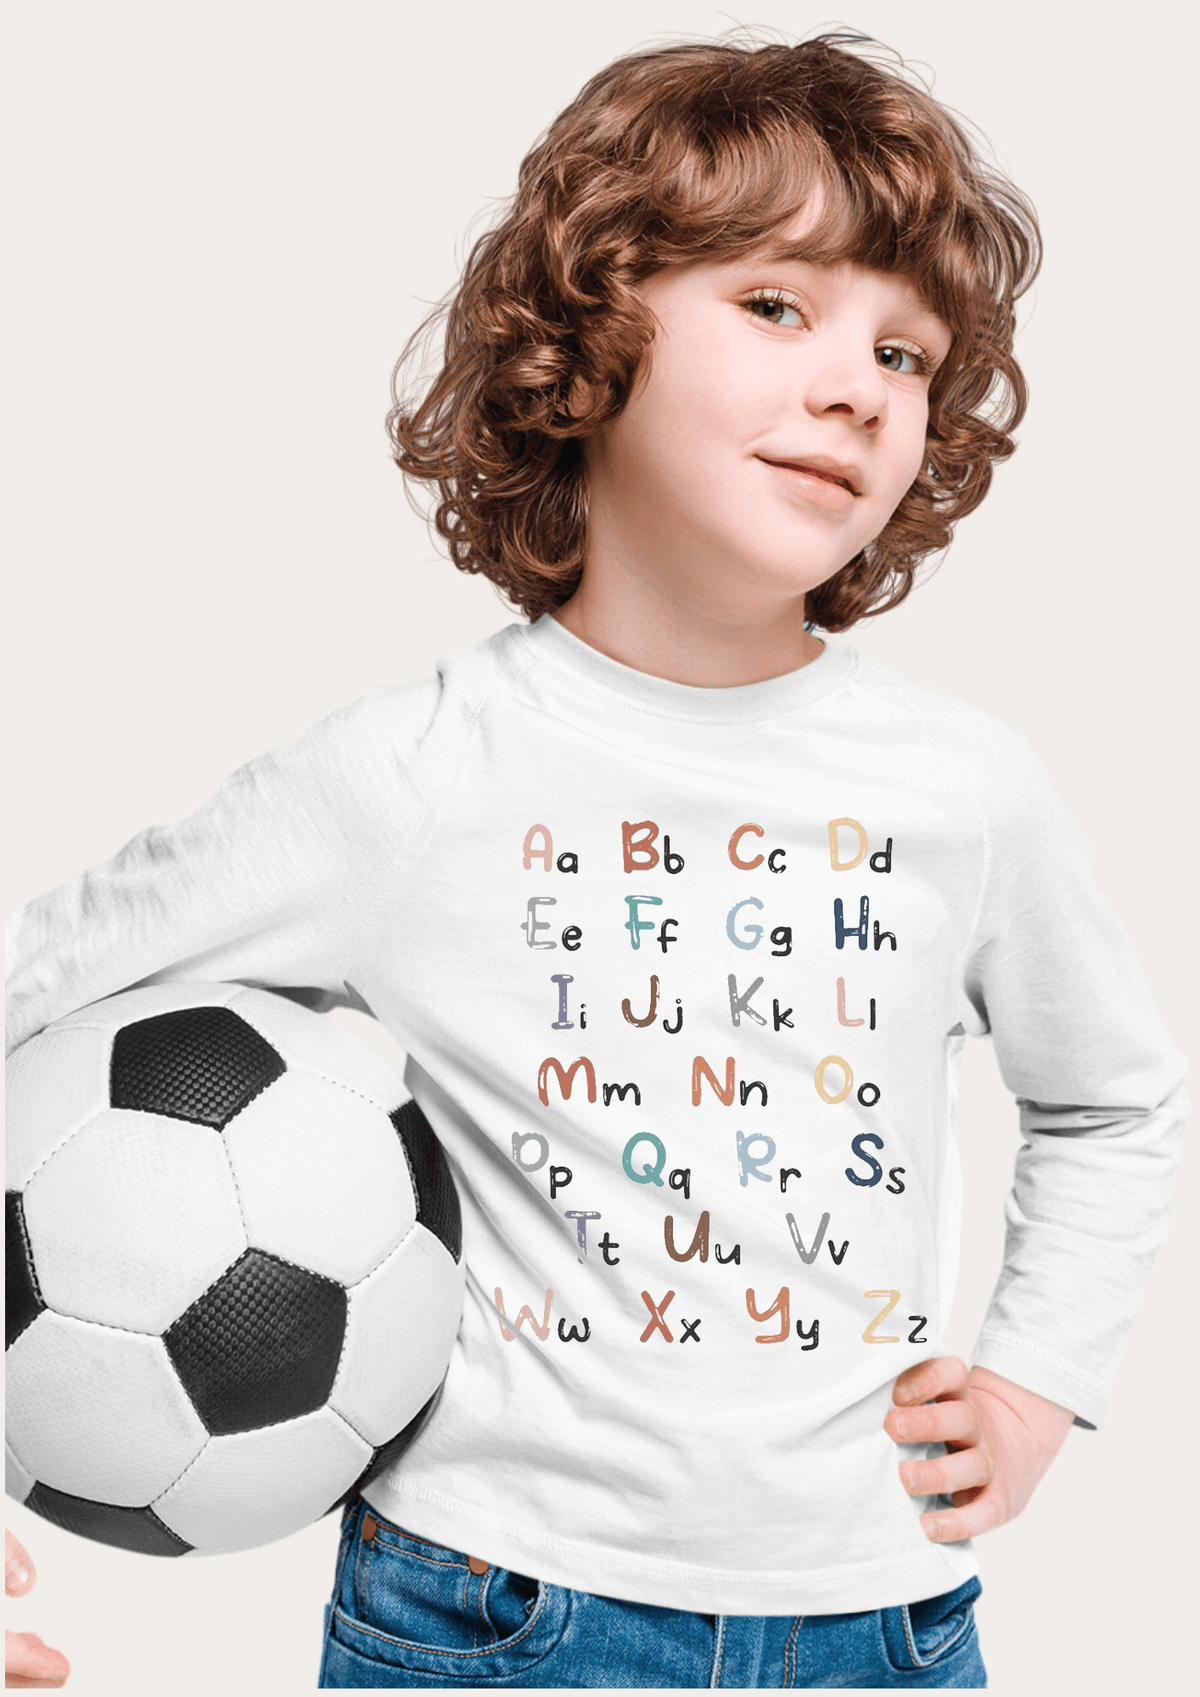 Alphabets Printed White Full Sleeves Kids T-shirt By Offmint